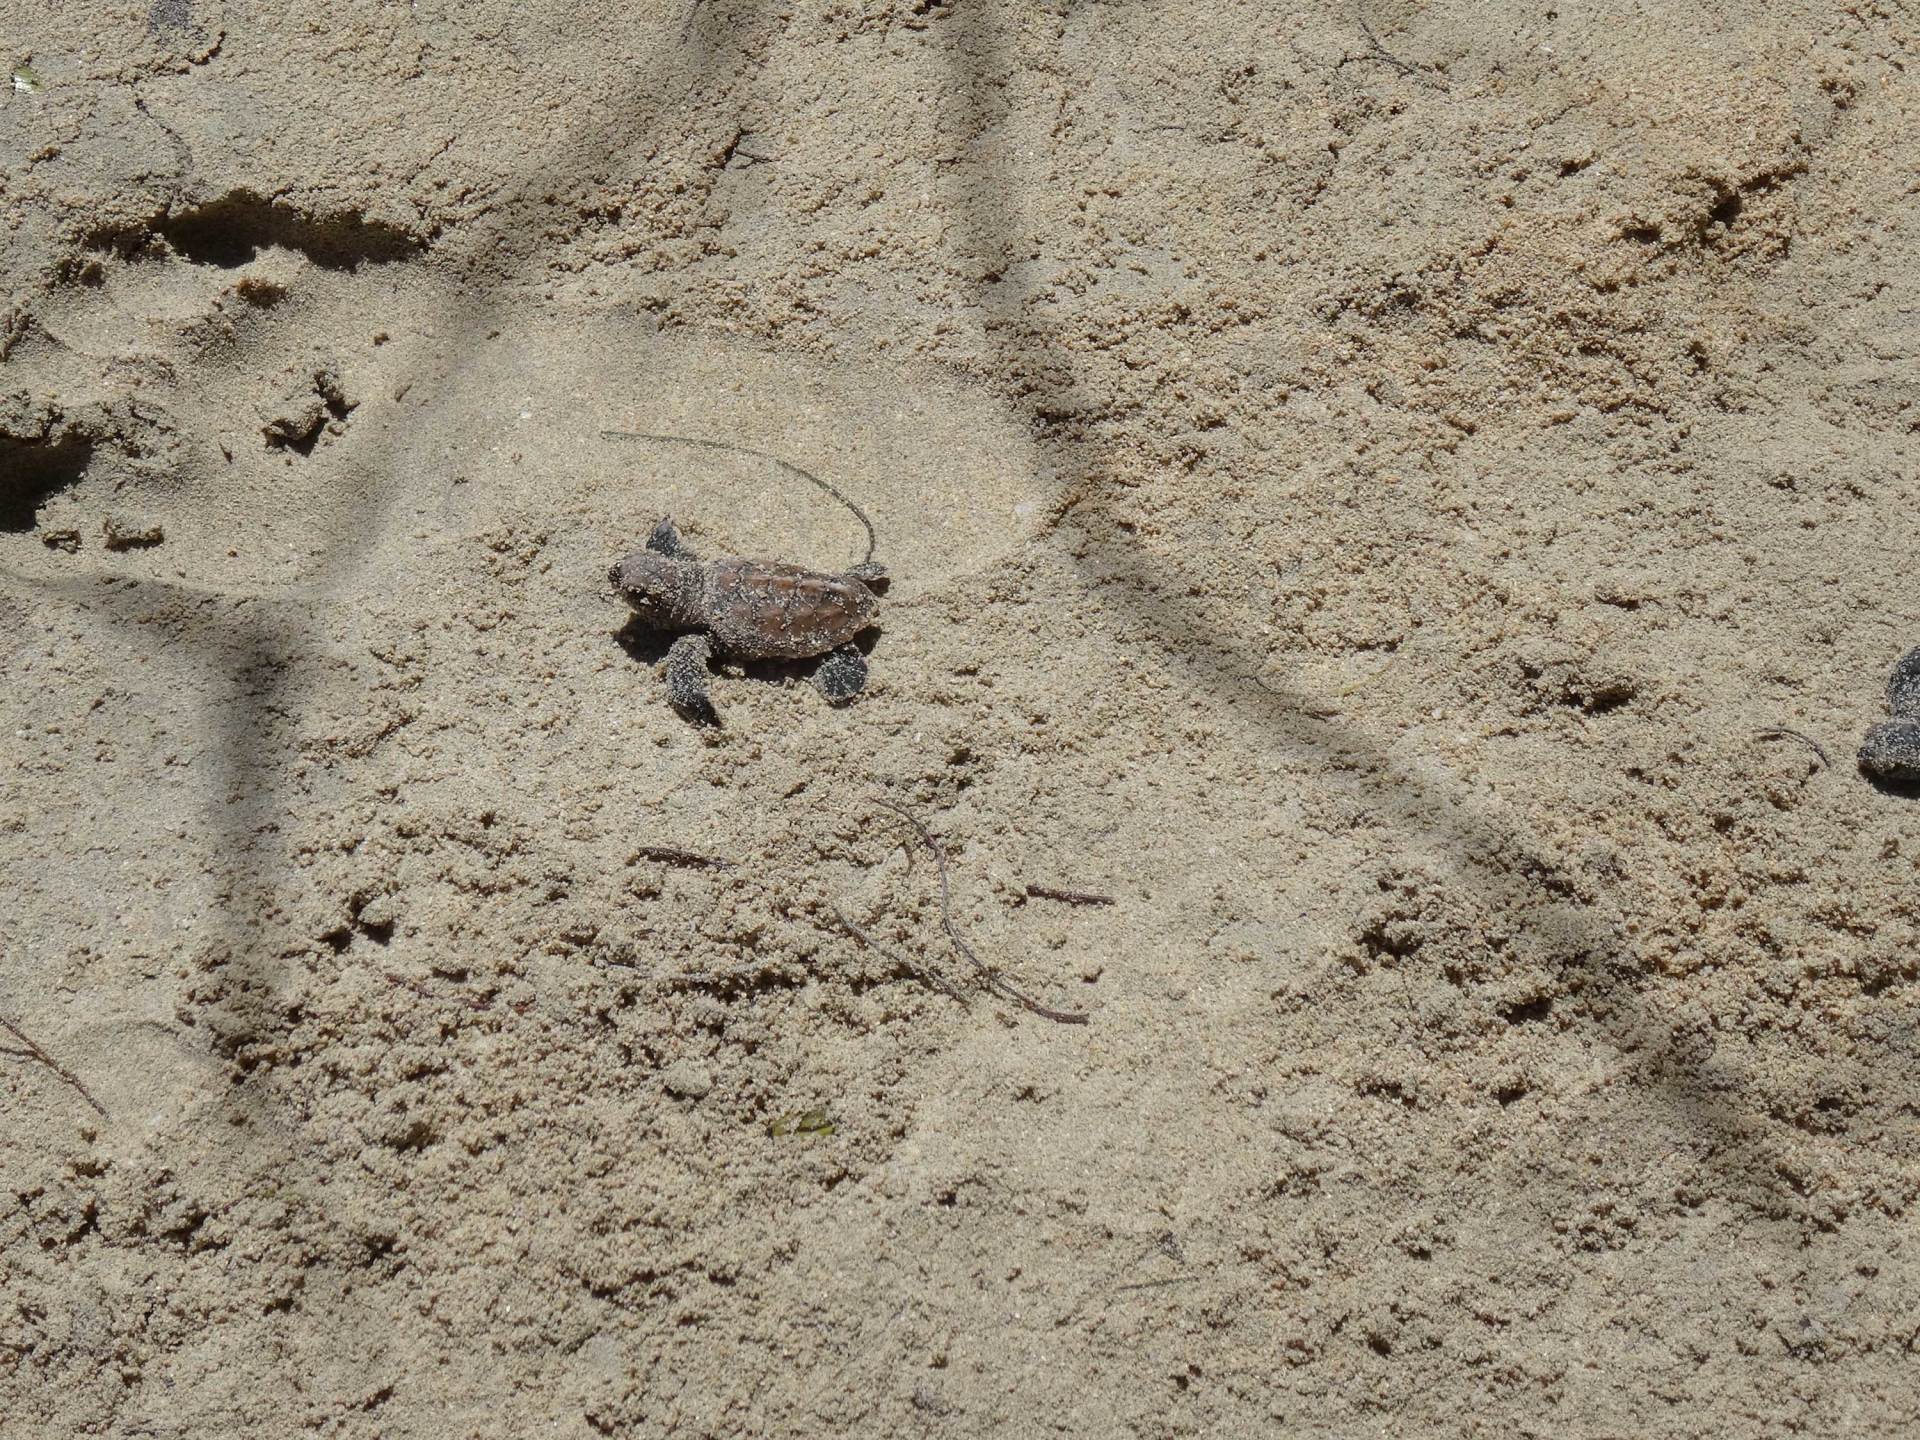 A turtle hatchling making its way across the sand